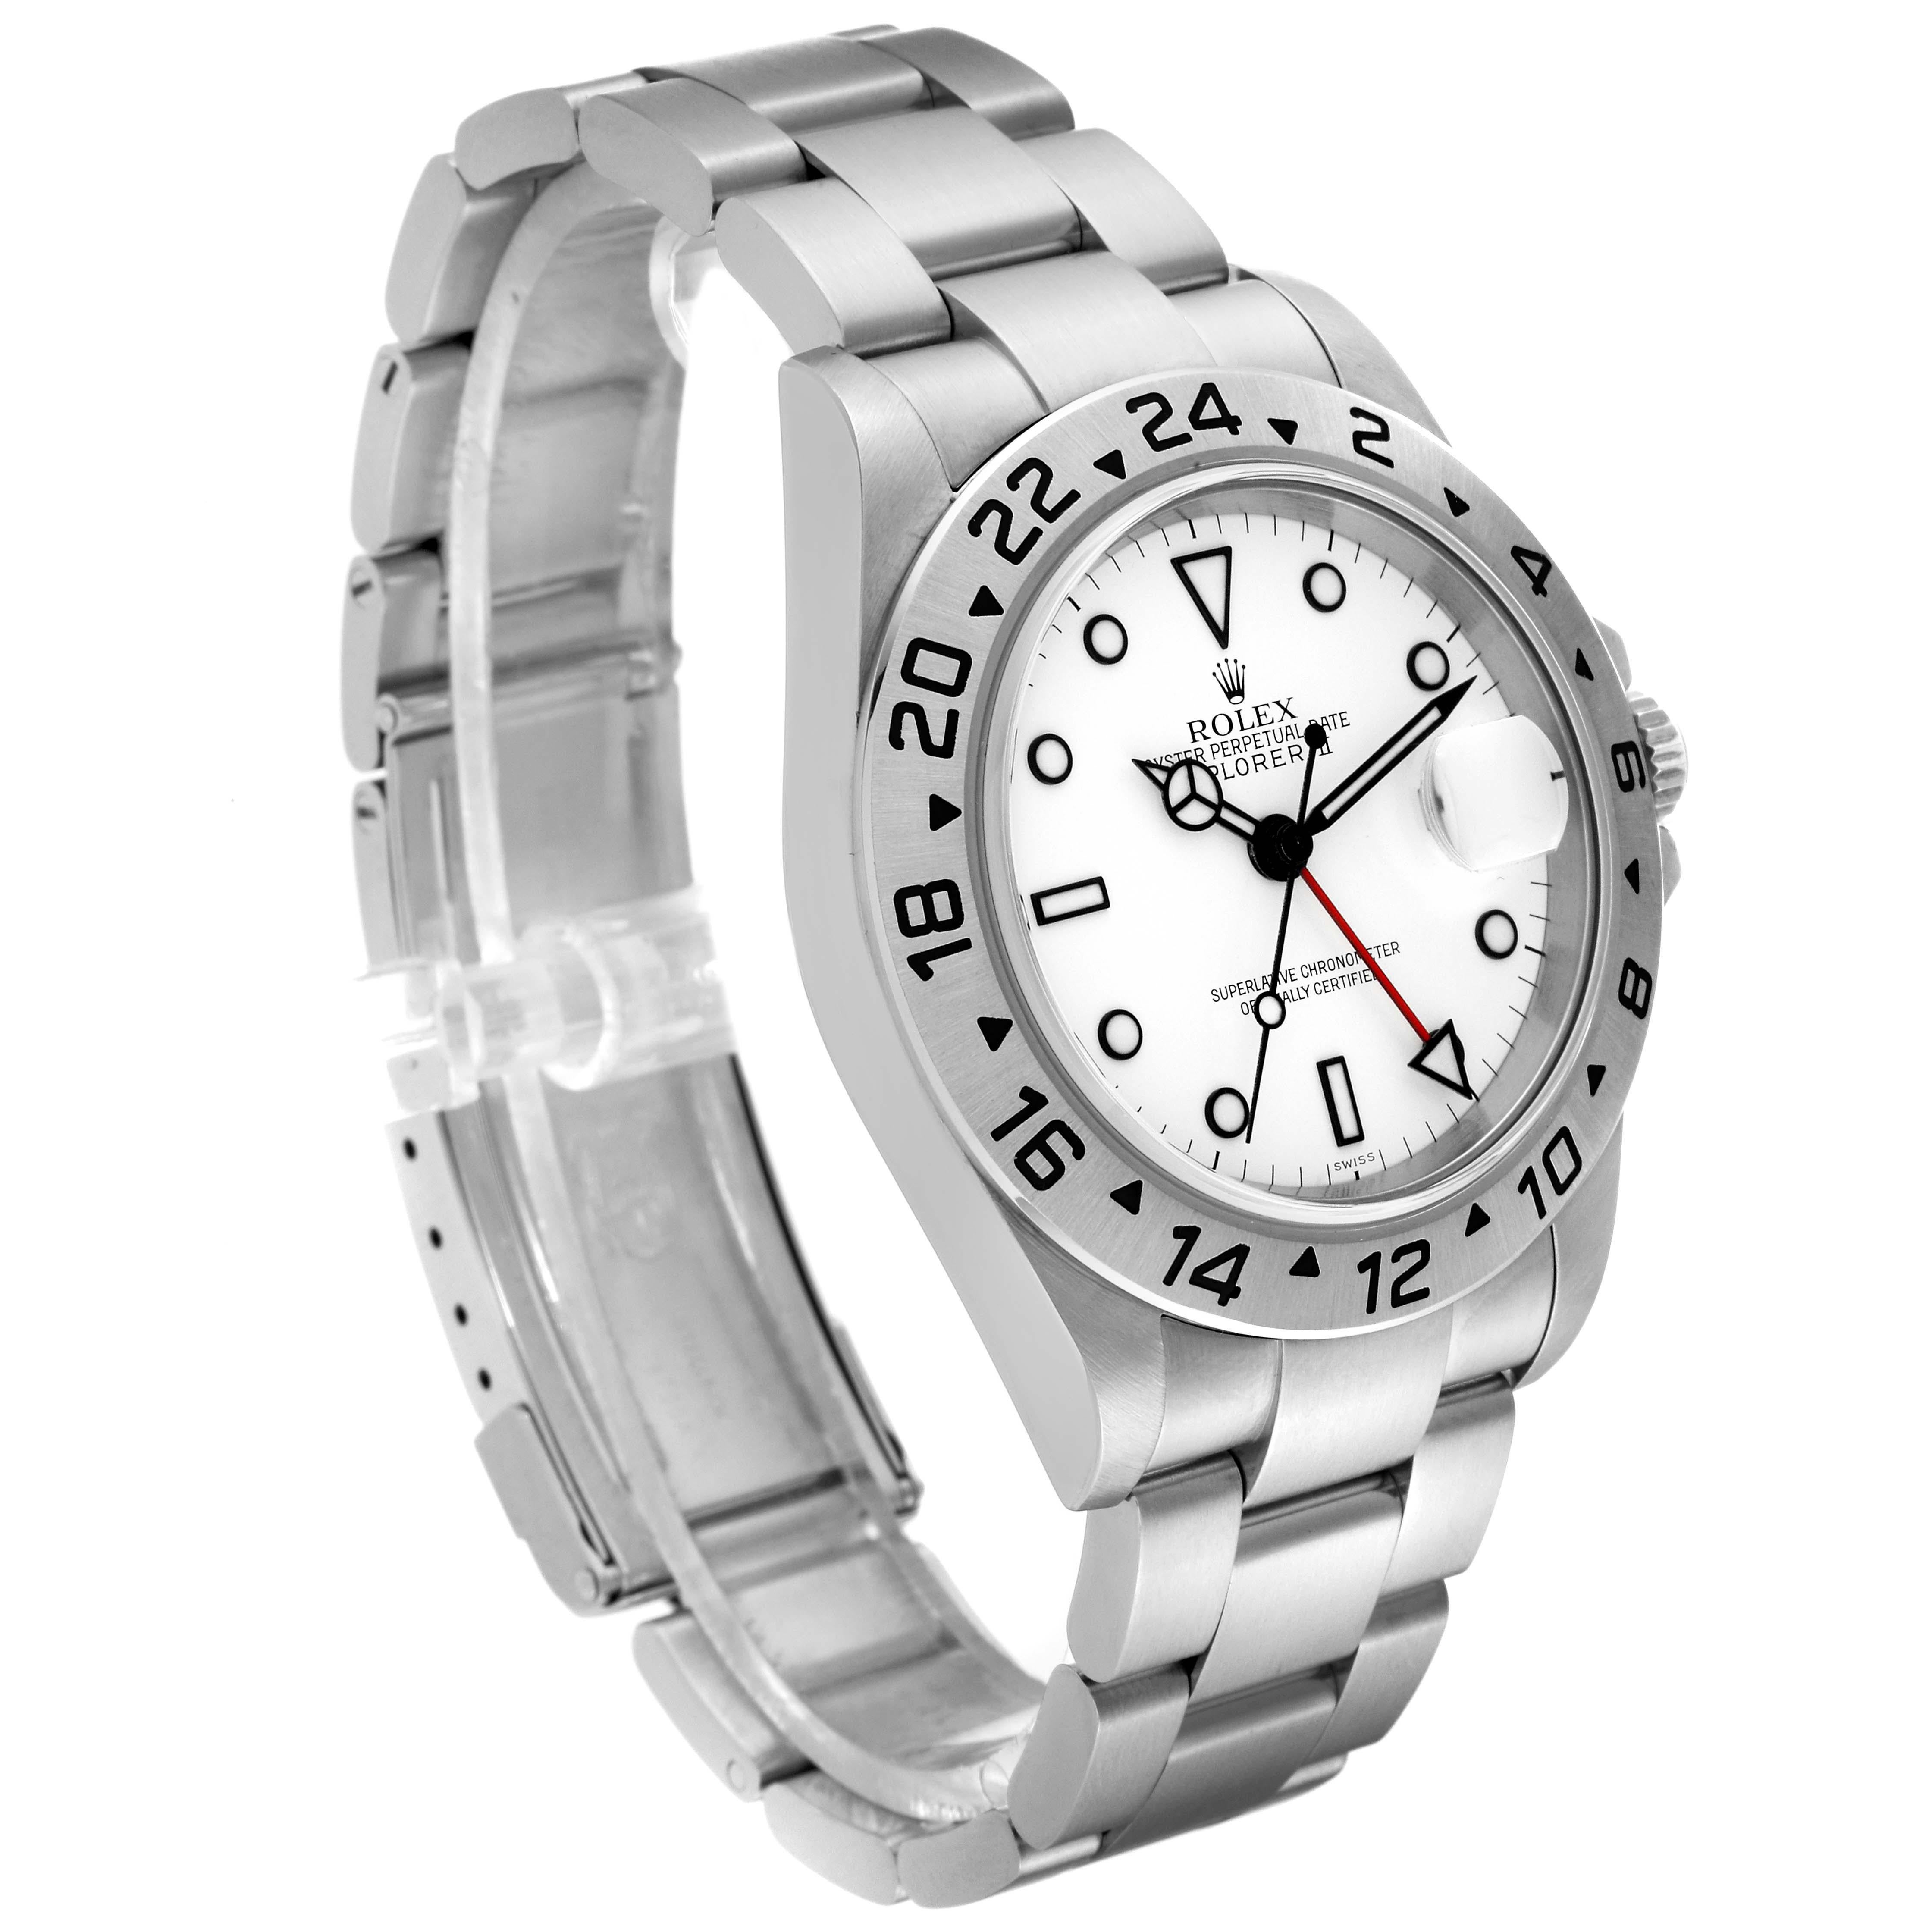 Men's Rolex Explorer II 40mm Polar White Dial Steel Mens Watch 16570 Box Papers For Sale